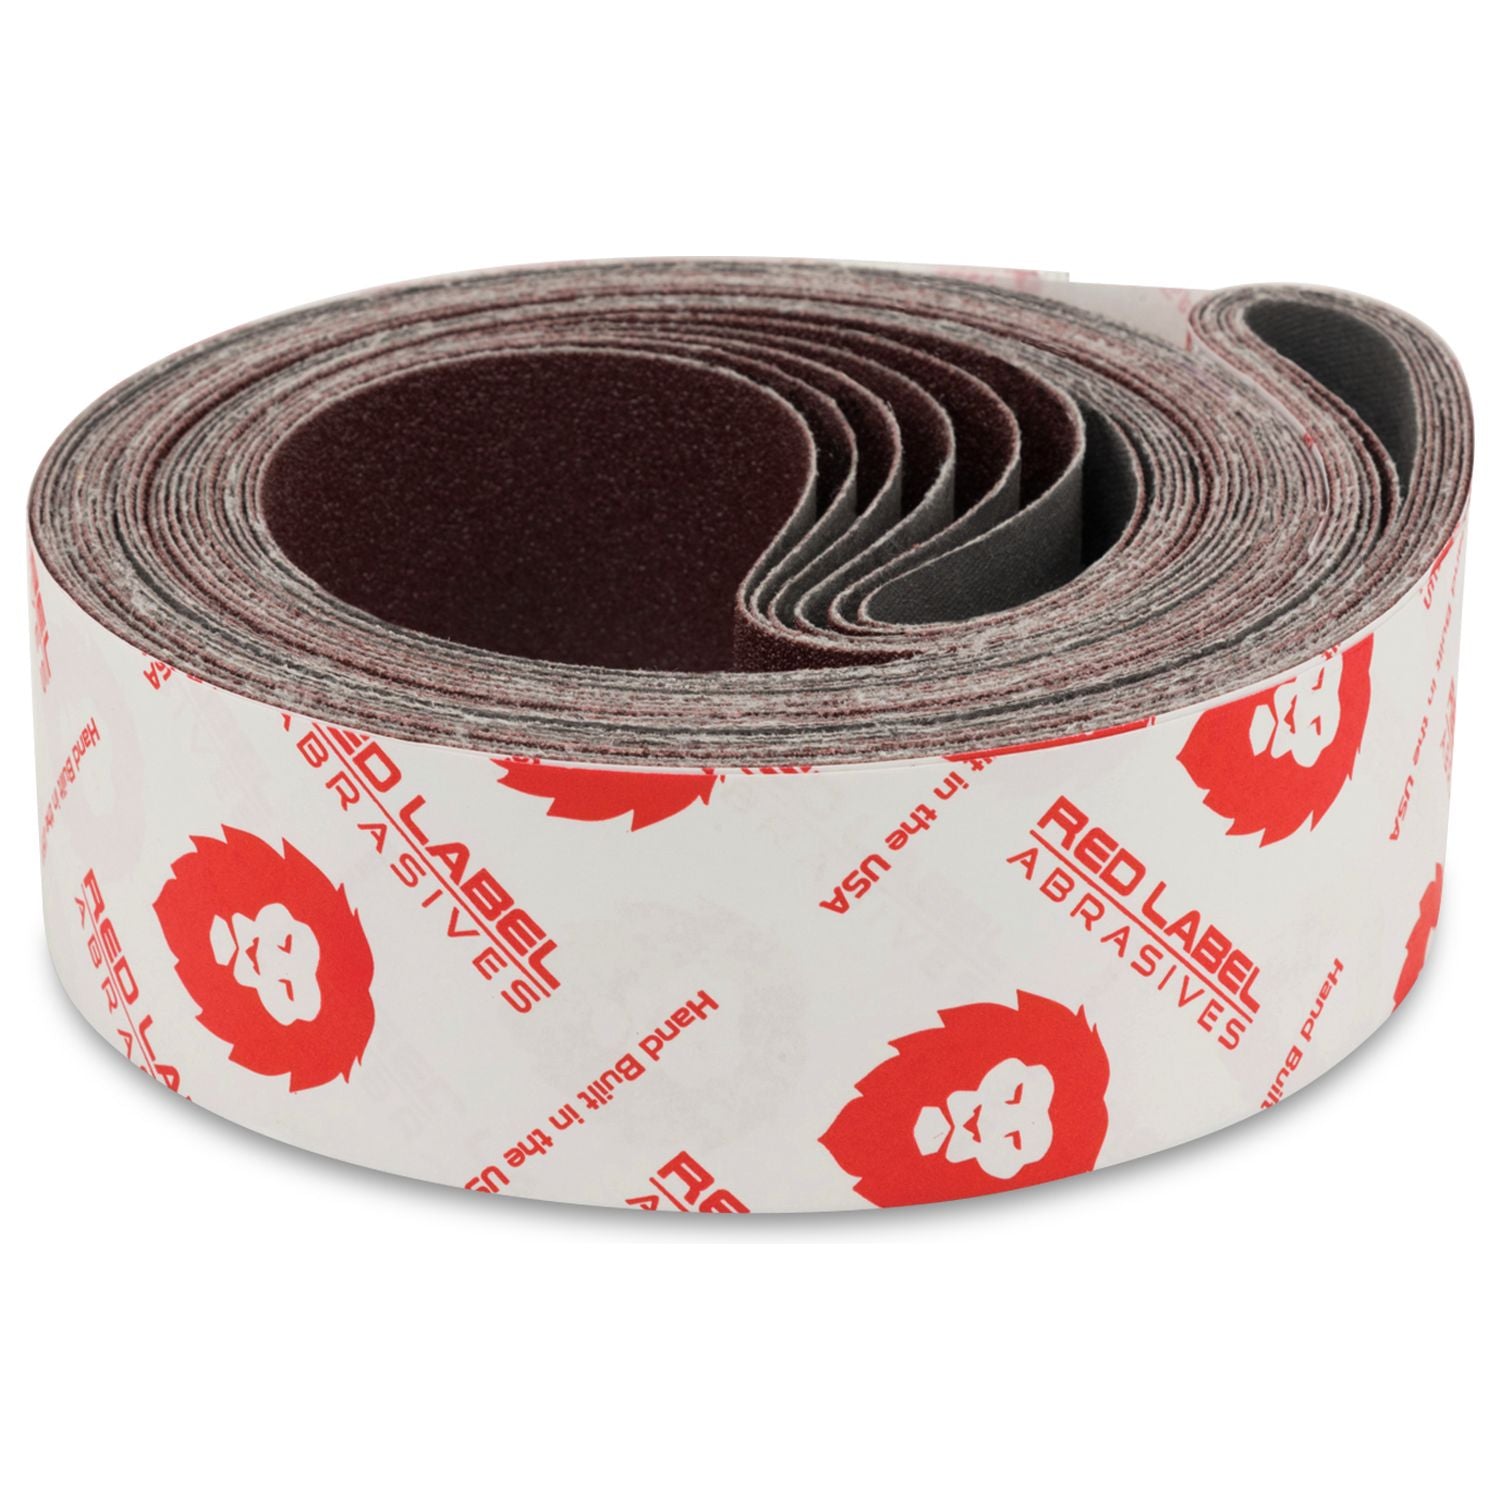 Red Label Abrasives | Abrasive Company | Buy Factory Direct